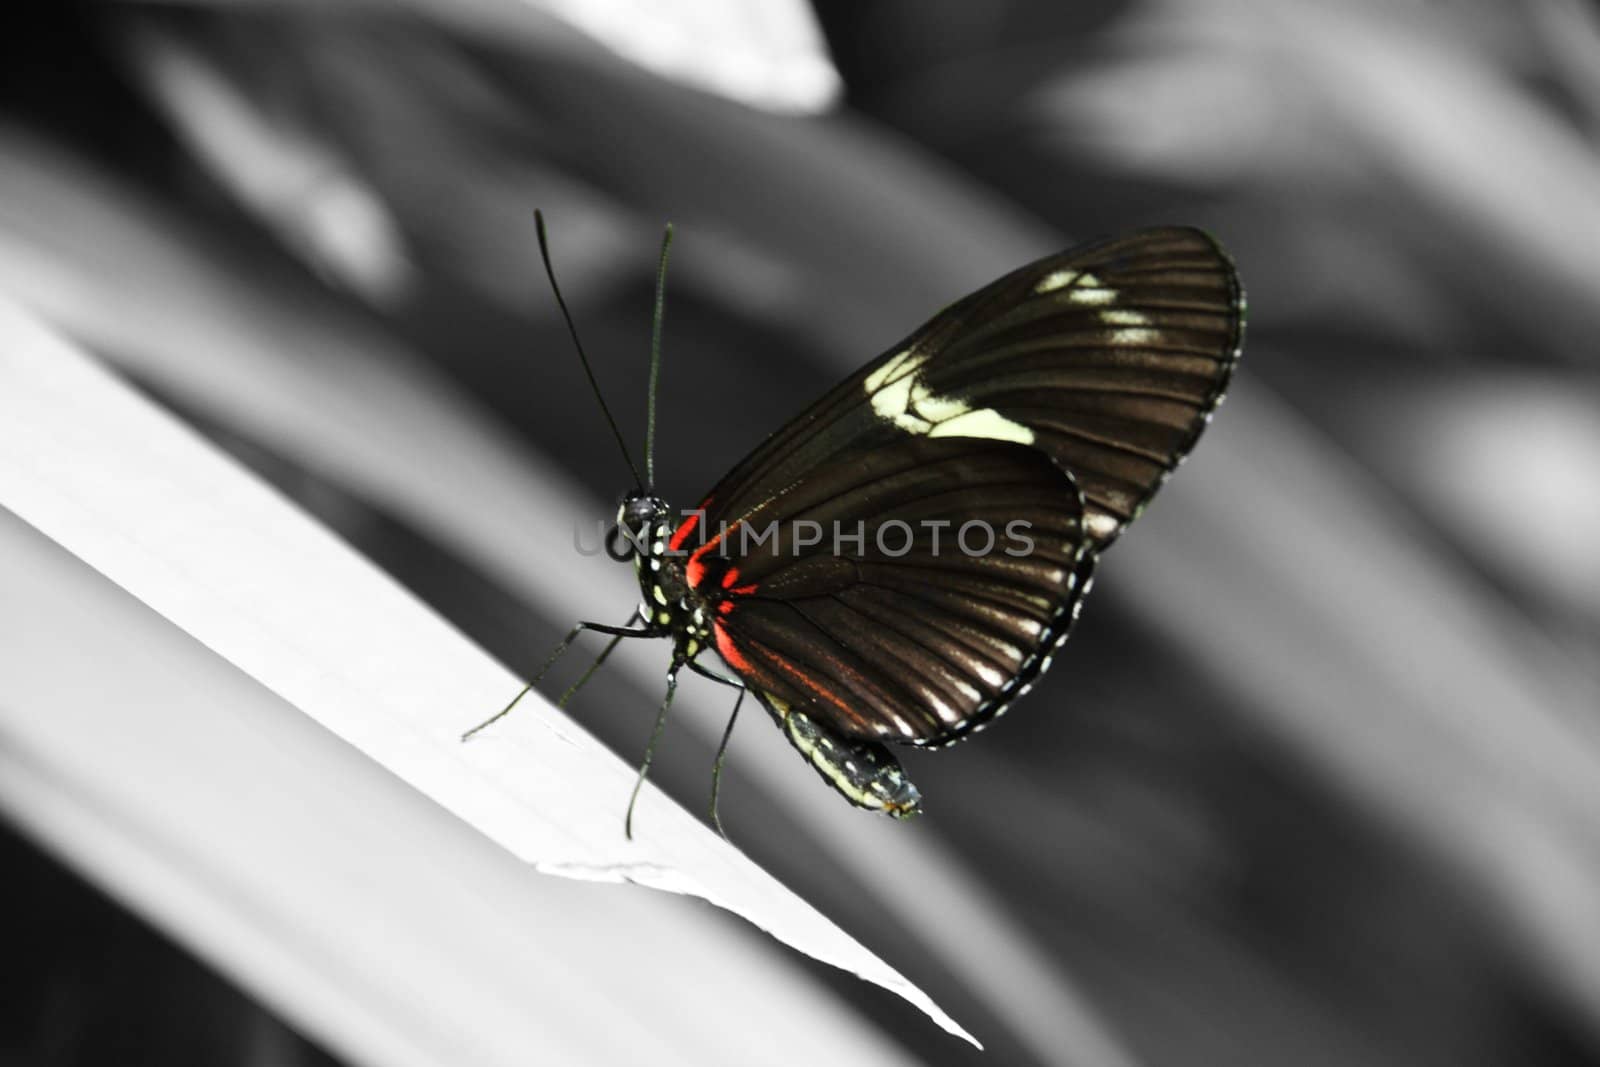 Butterfly in natural surrounds, but colored to stand out.